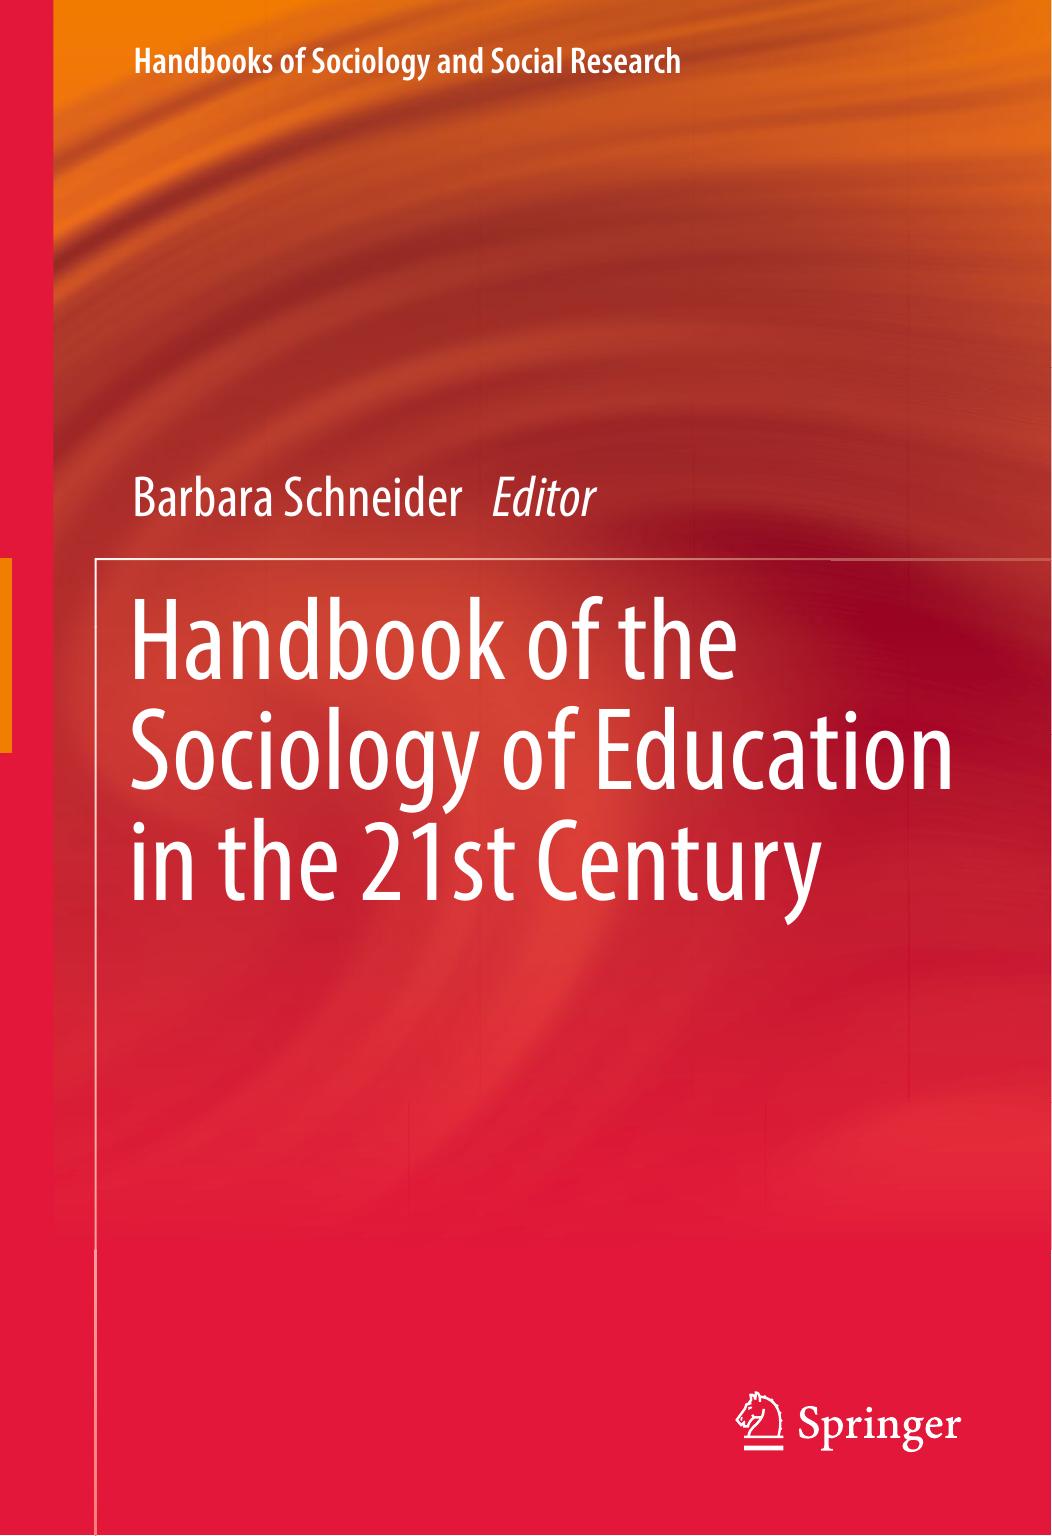 Handbook of the Sociology of Education in the 21st Century 2018